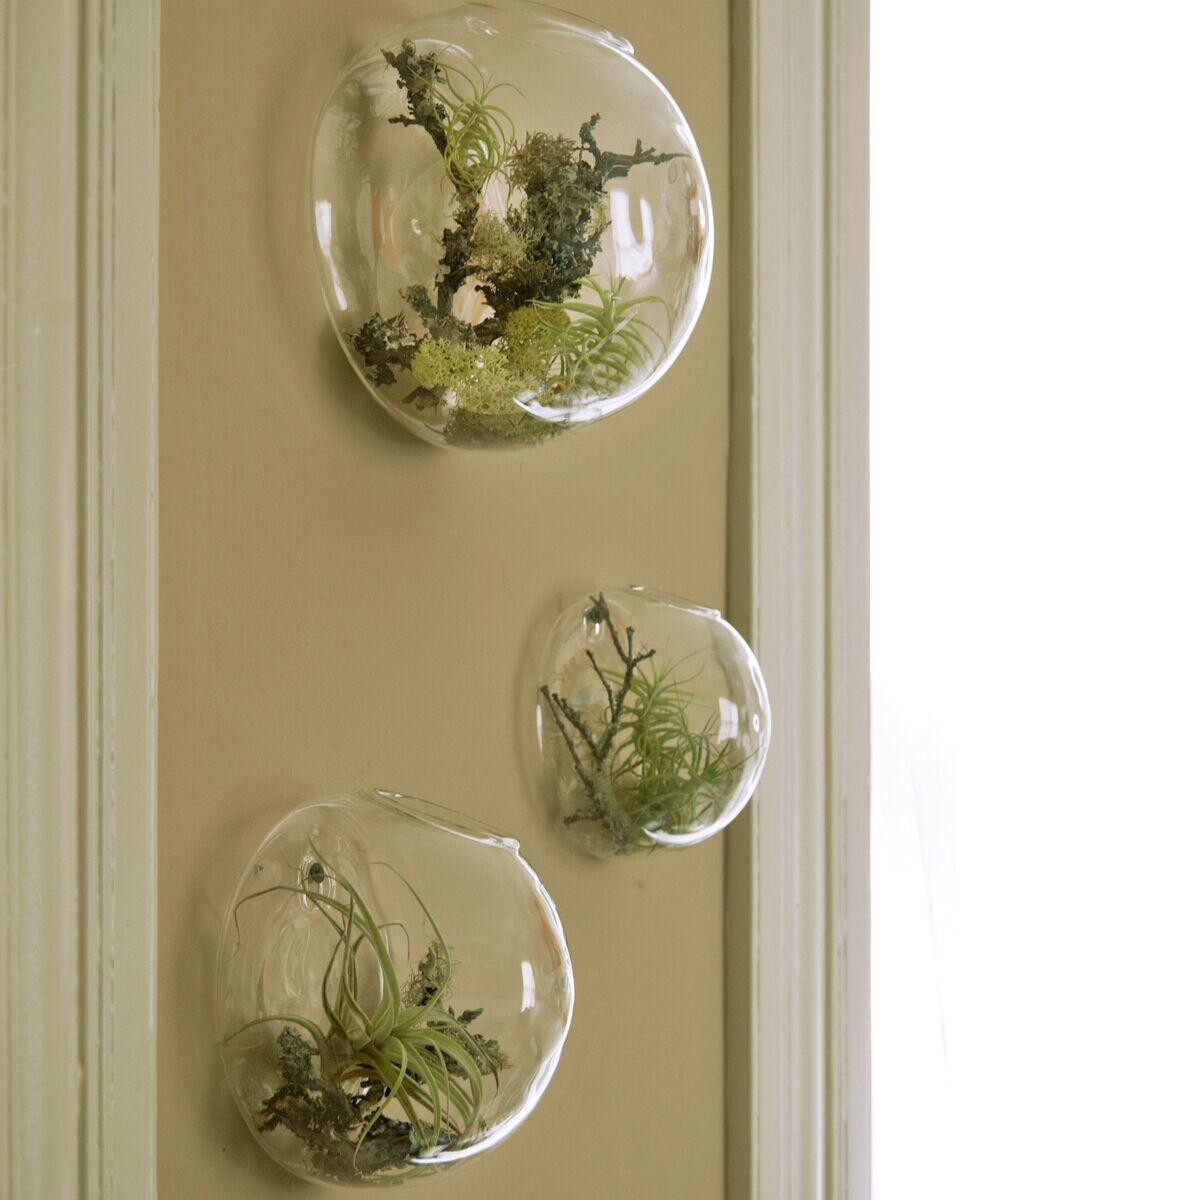 4 inch glass vase of wall bubble terrariums glass wall vase for flowers indoor plants regarding wall bubble terrariums glass wall vase for flowers indoor plants wall mounted planter for succulents air plant holders home decor inexpensive floor vases